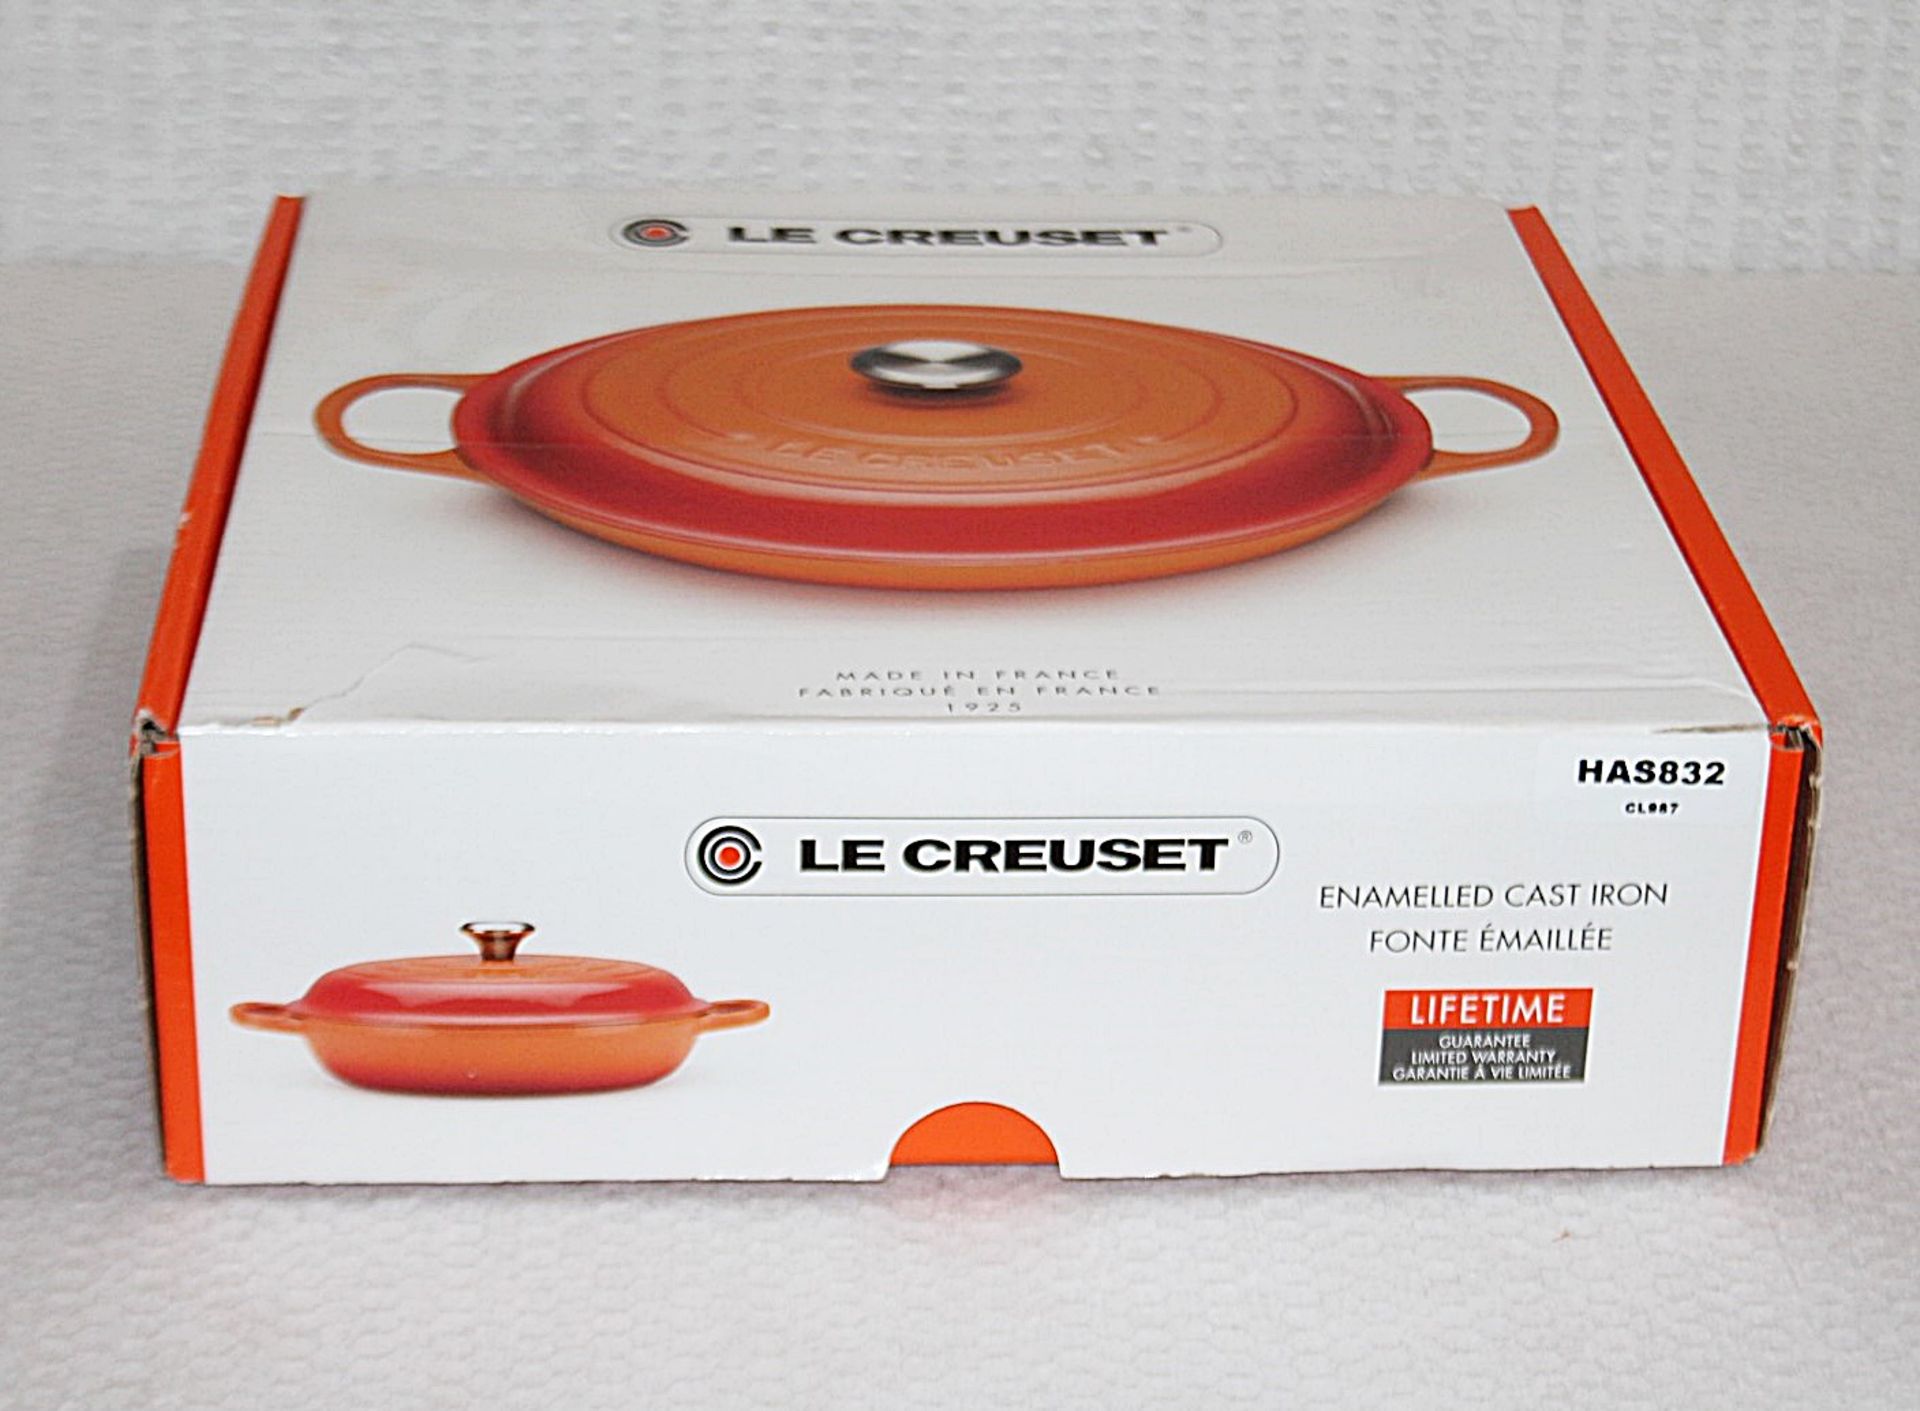 1 x LE CREUSET 'Signature' Enamelled Cast Iron 30cm Shallow Casserole Dish With Lid - RRP £270.00 - Image 3 of 10